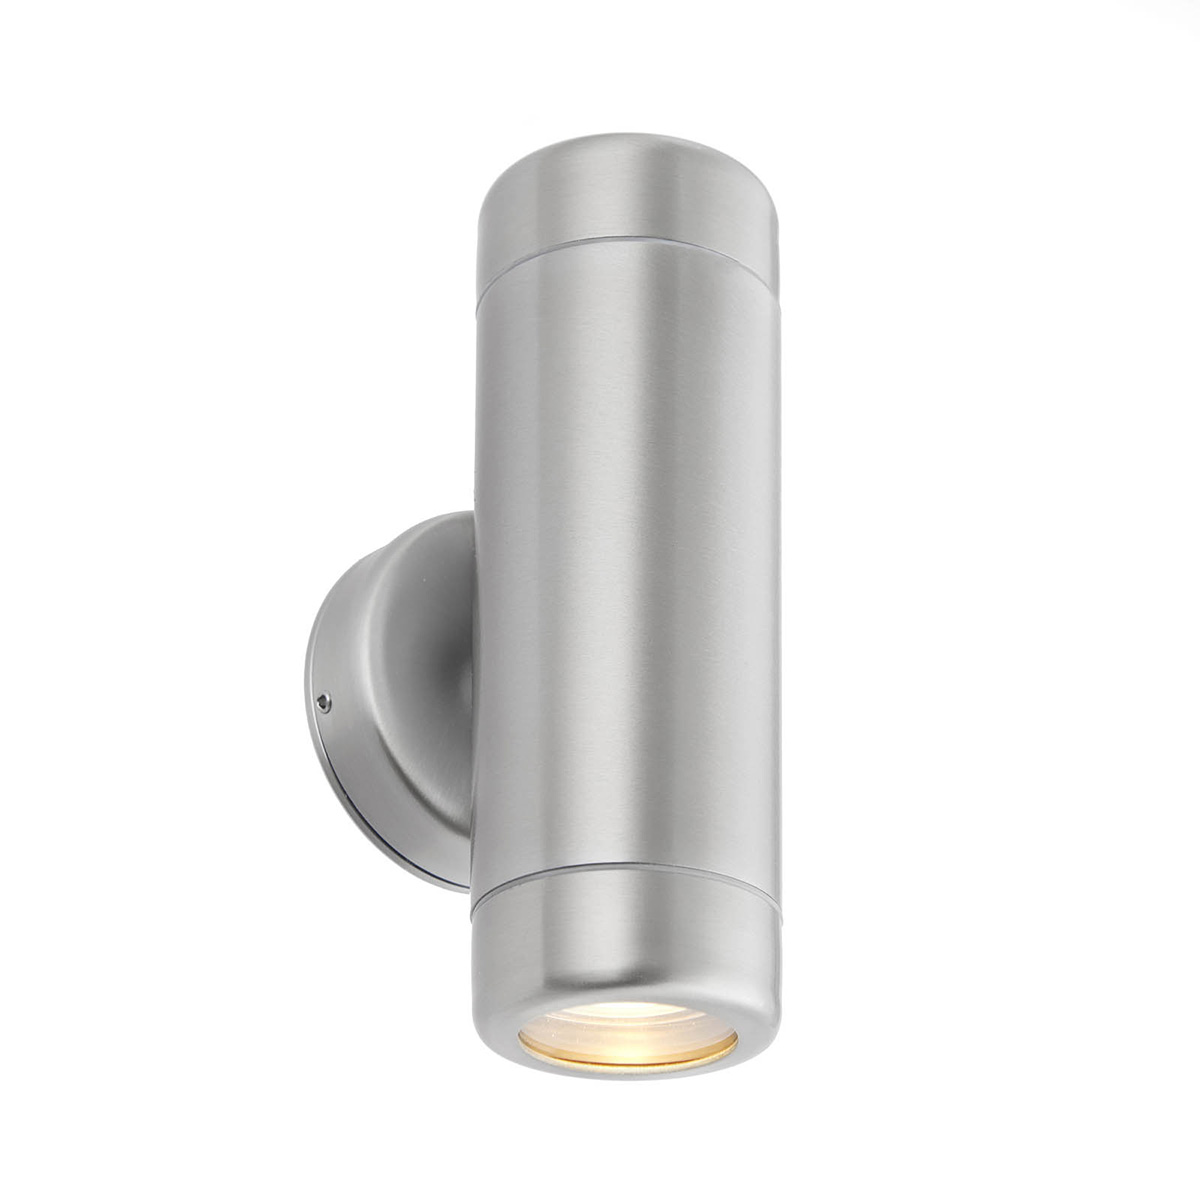 Saxby Odyssey Stainless Steel Outdoor Garden Up/Down gu10 Wall Light ip65